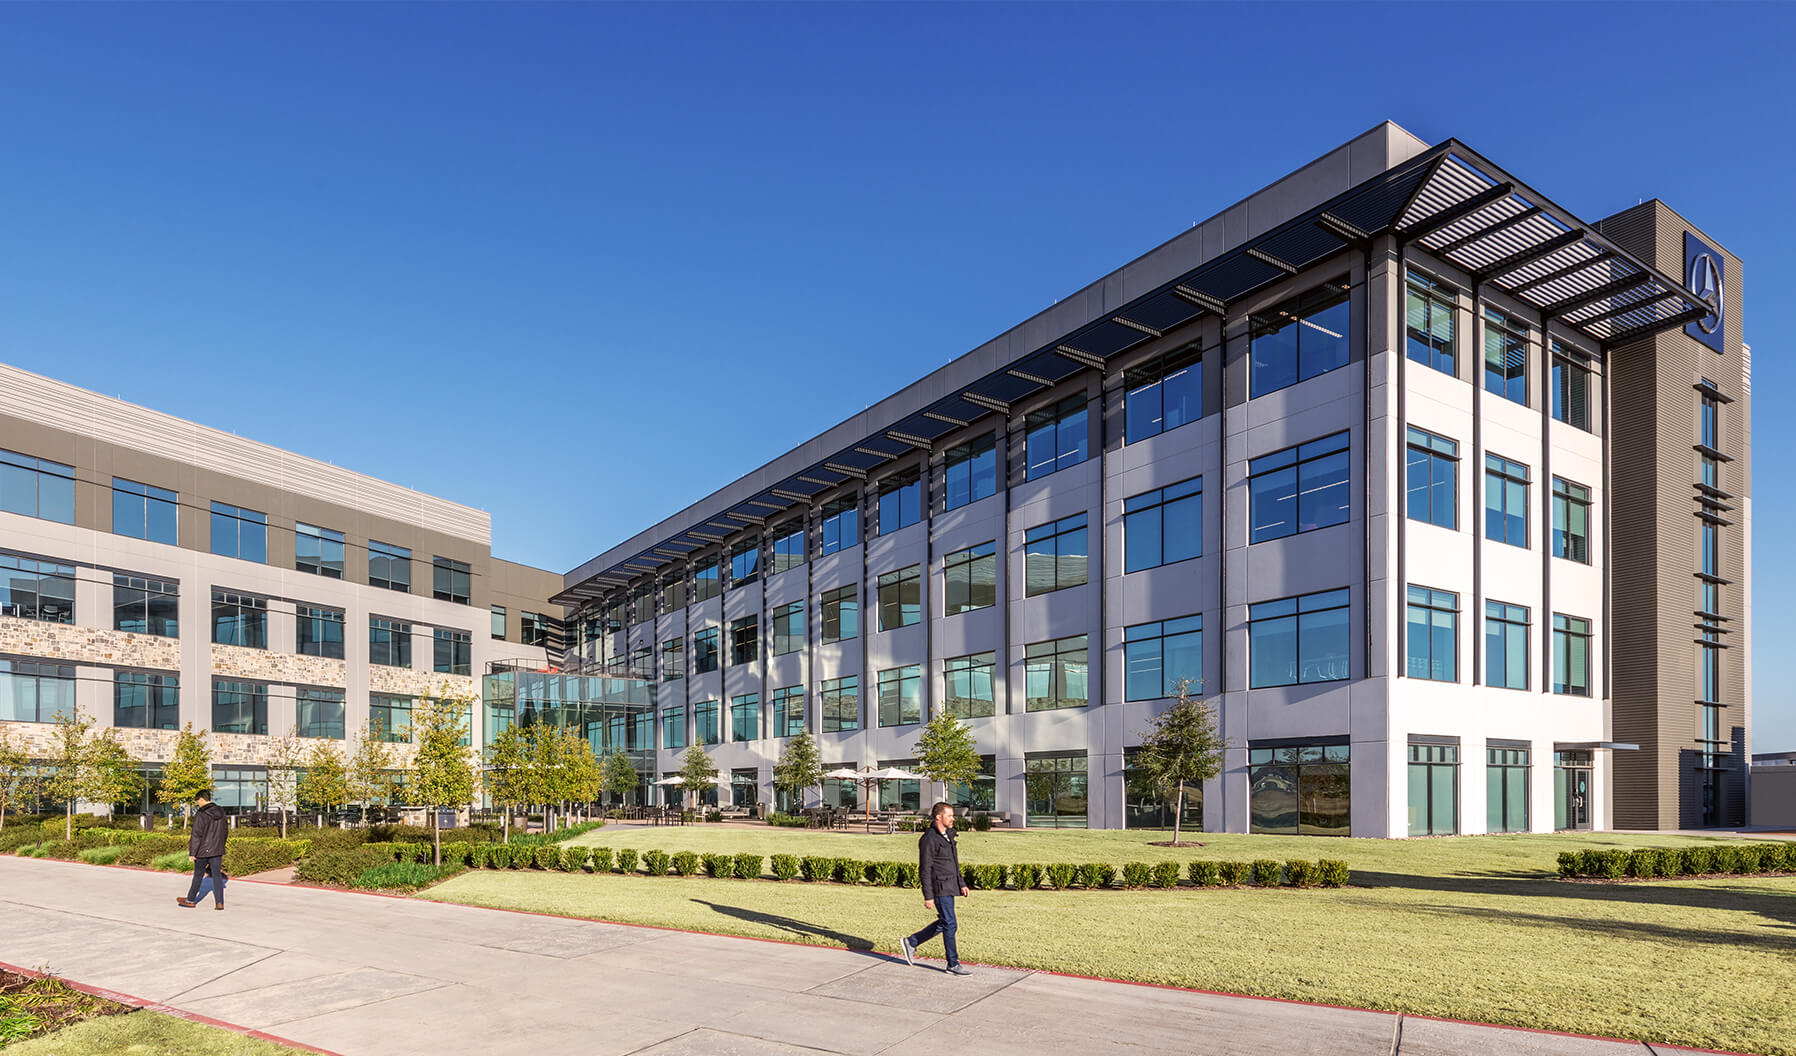 Located just outside of Fort Worth, Texas, Mercedes-Benz Financial Services applied a build-to-suit approach to create a state-of-the-art building. The three-story space is approximately 200,000 square-foot and provides the space needed to support over 1,000 employees. Three primary goals directed the project: cultivate corporate culture, inspire creativity, and improve productivity.